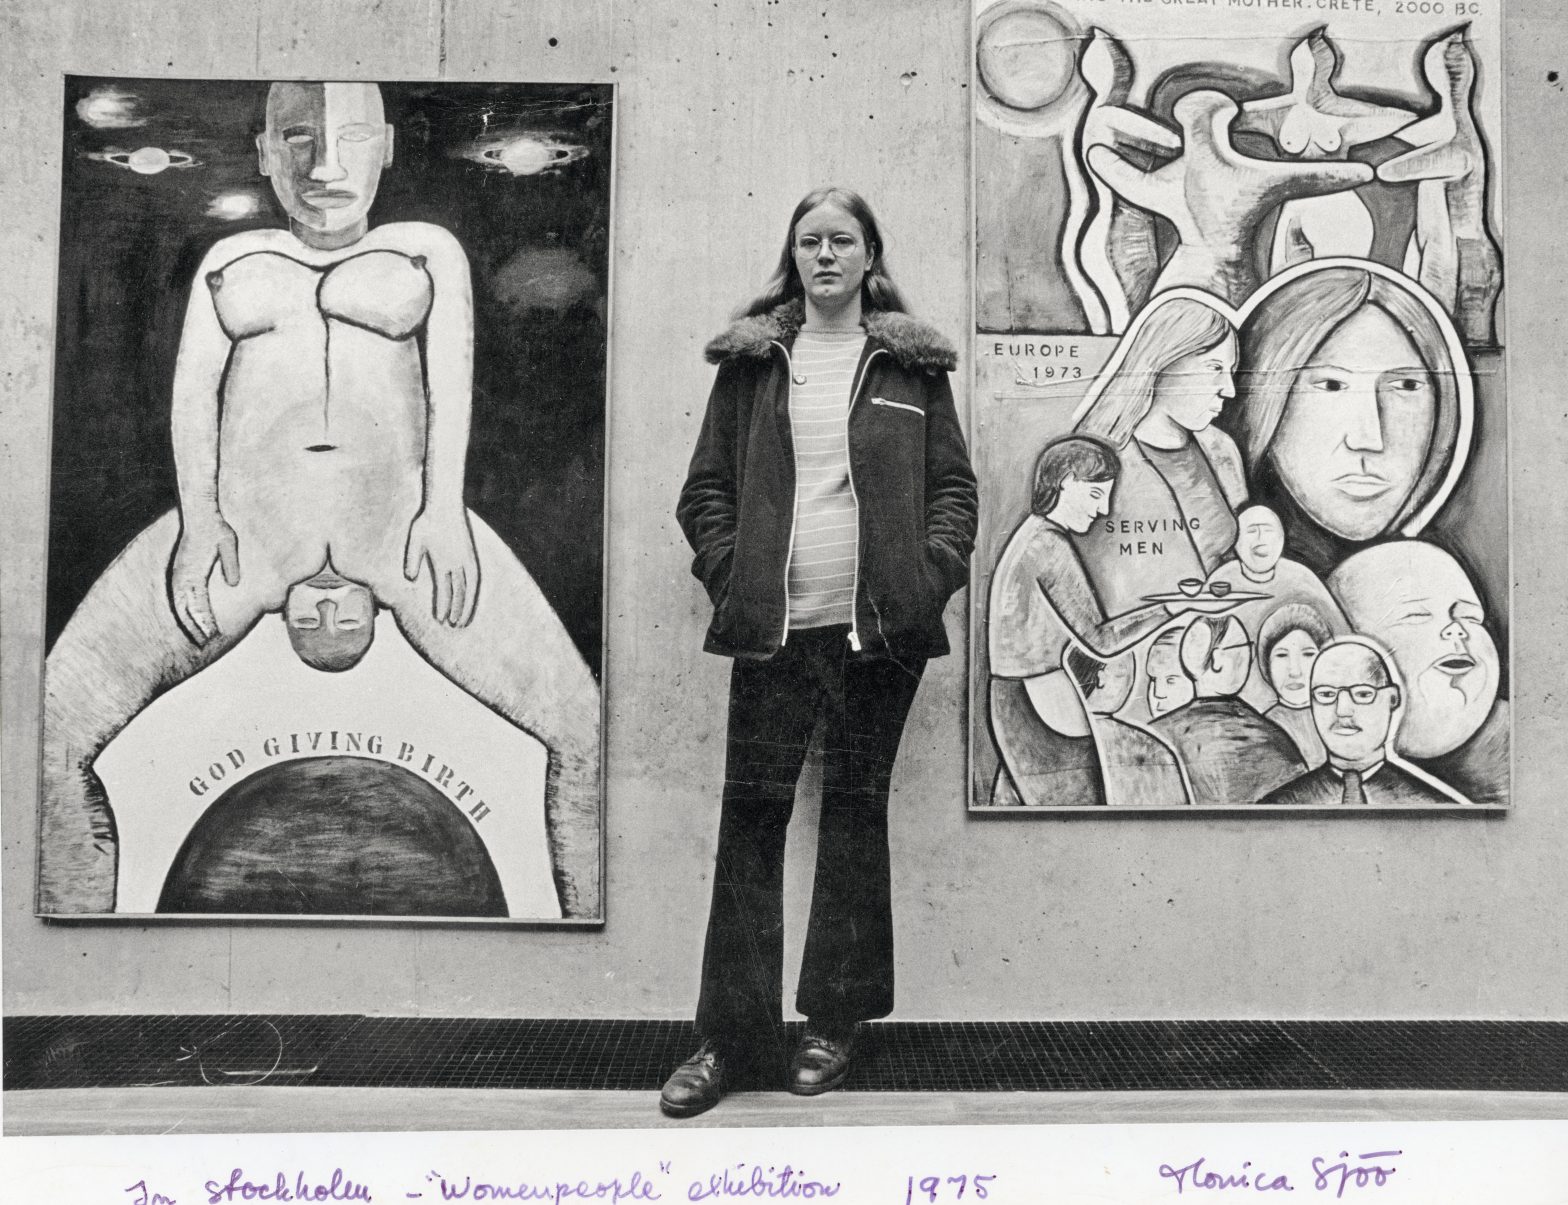 A black and white photo of artist Monica Sjöö standing in front of two of her paintings.